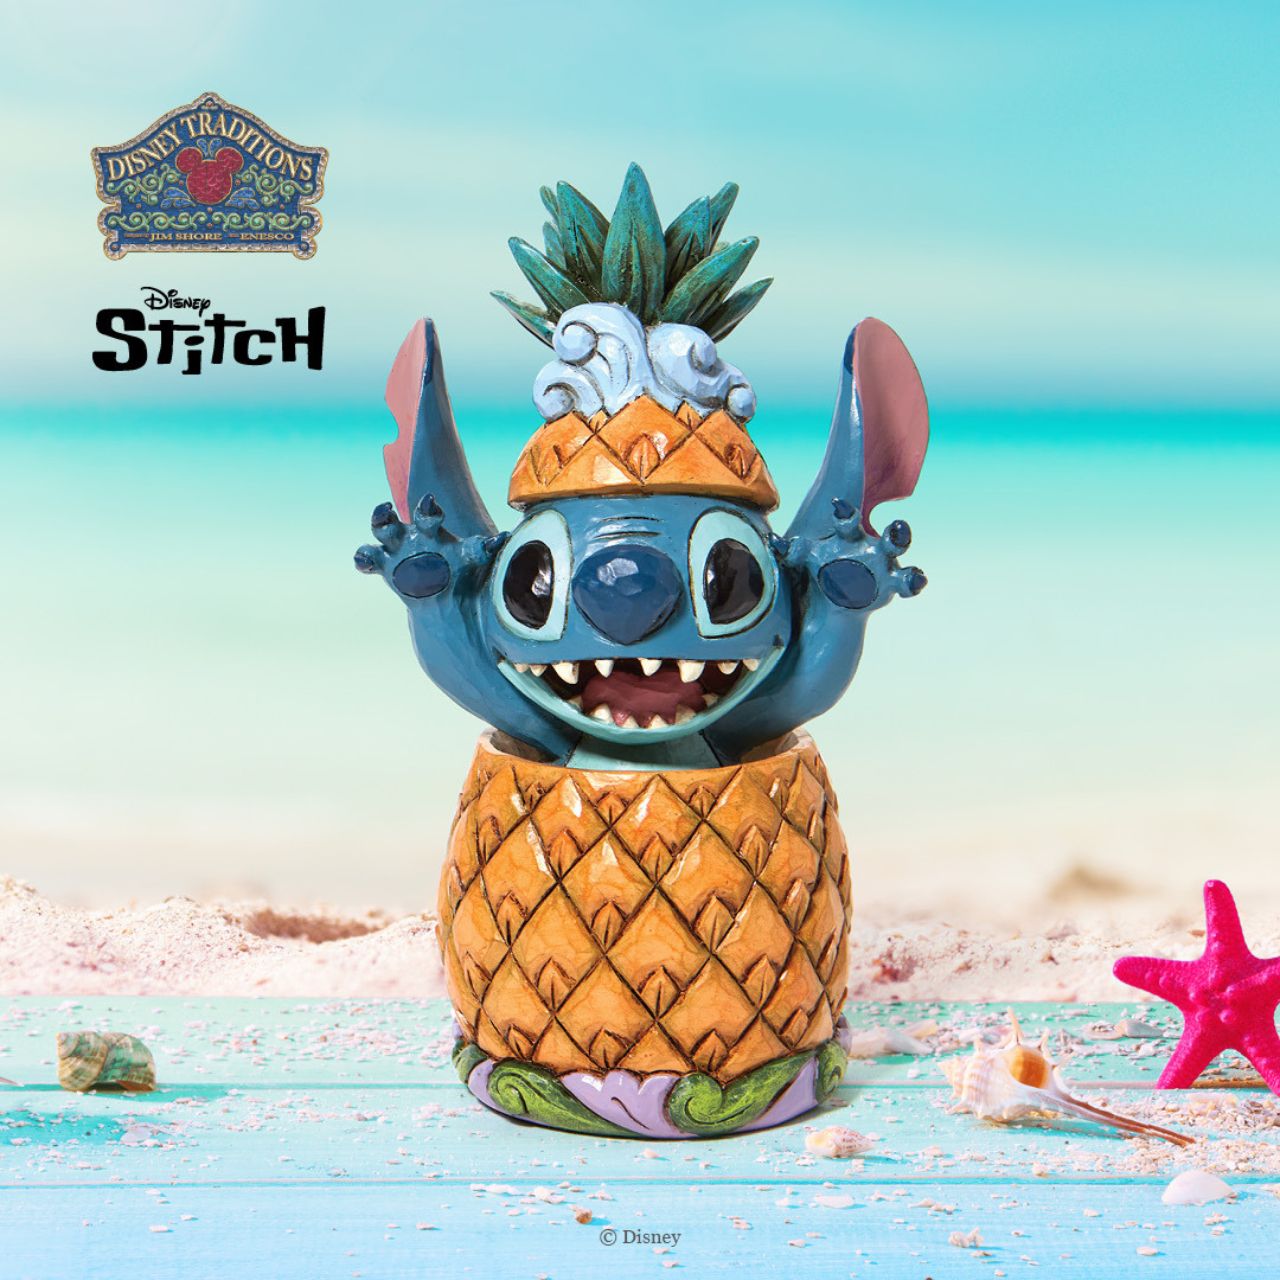 Disney Traditions Stitch in a Pineapple Figurine by Jim Shore  "Pineapple Pal" Popping cheerfully out a pineapple, Stitch celebrates the day and the twenty year anniversary of the film that brought him into our hearts. Wearing the pineapple top as a hat, the cheerful alien reaches for a hug.